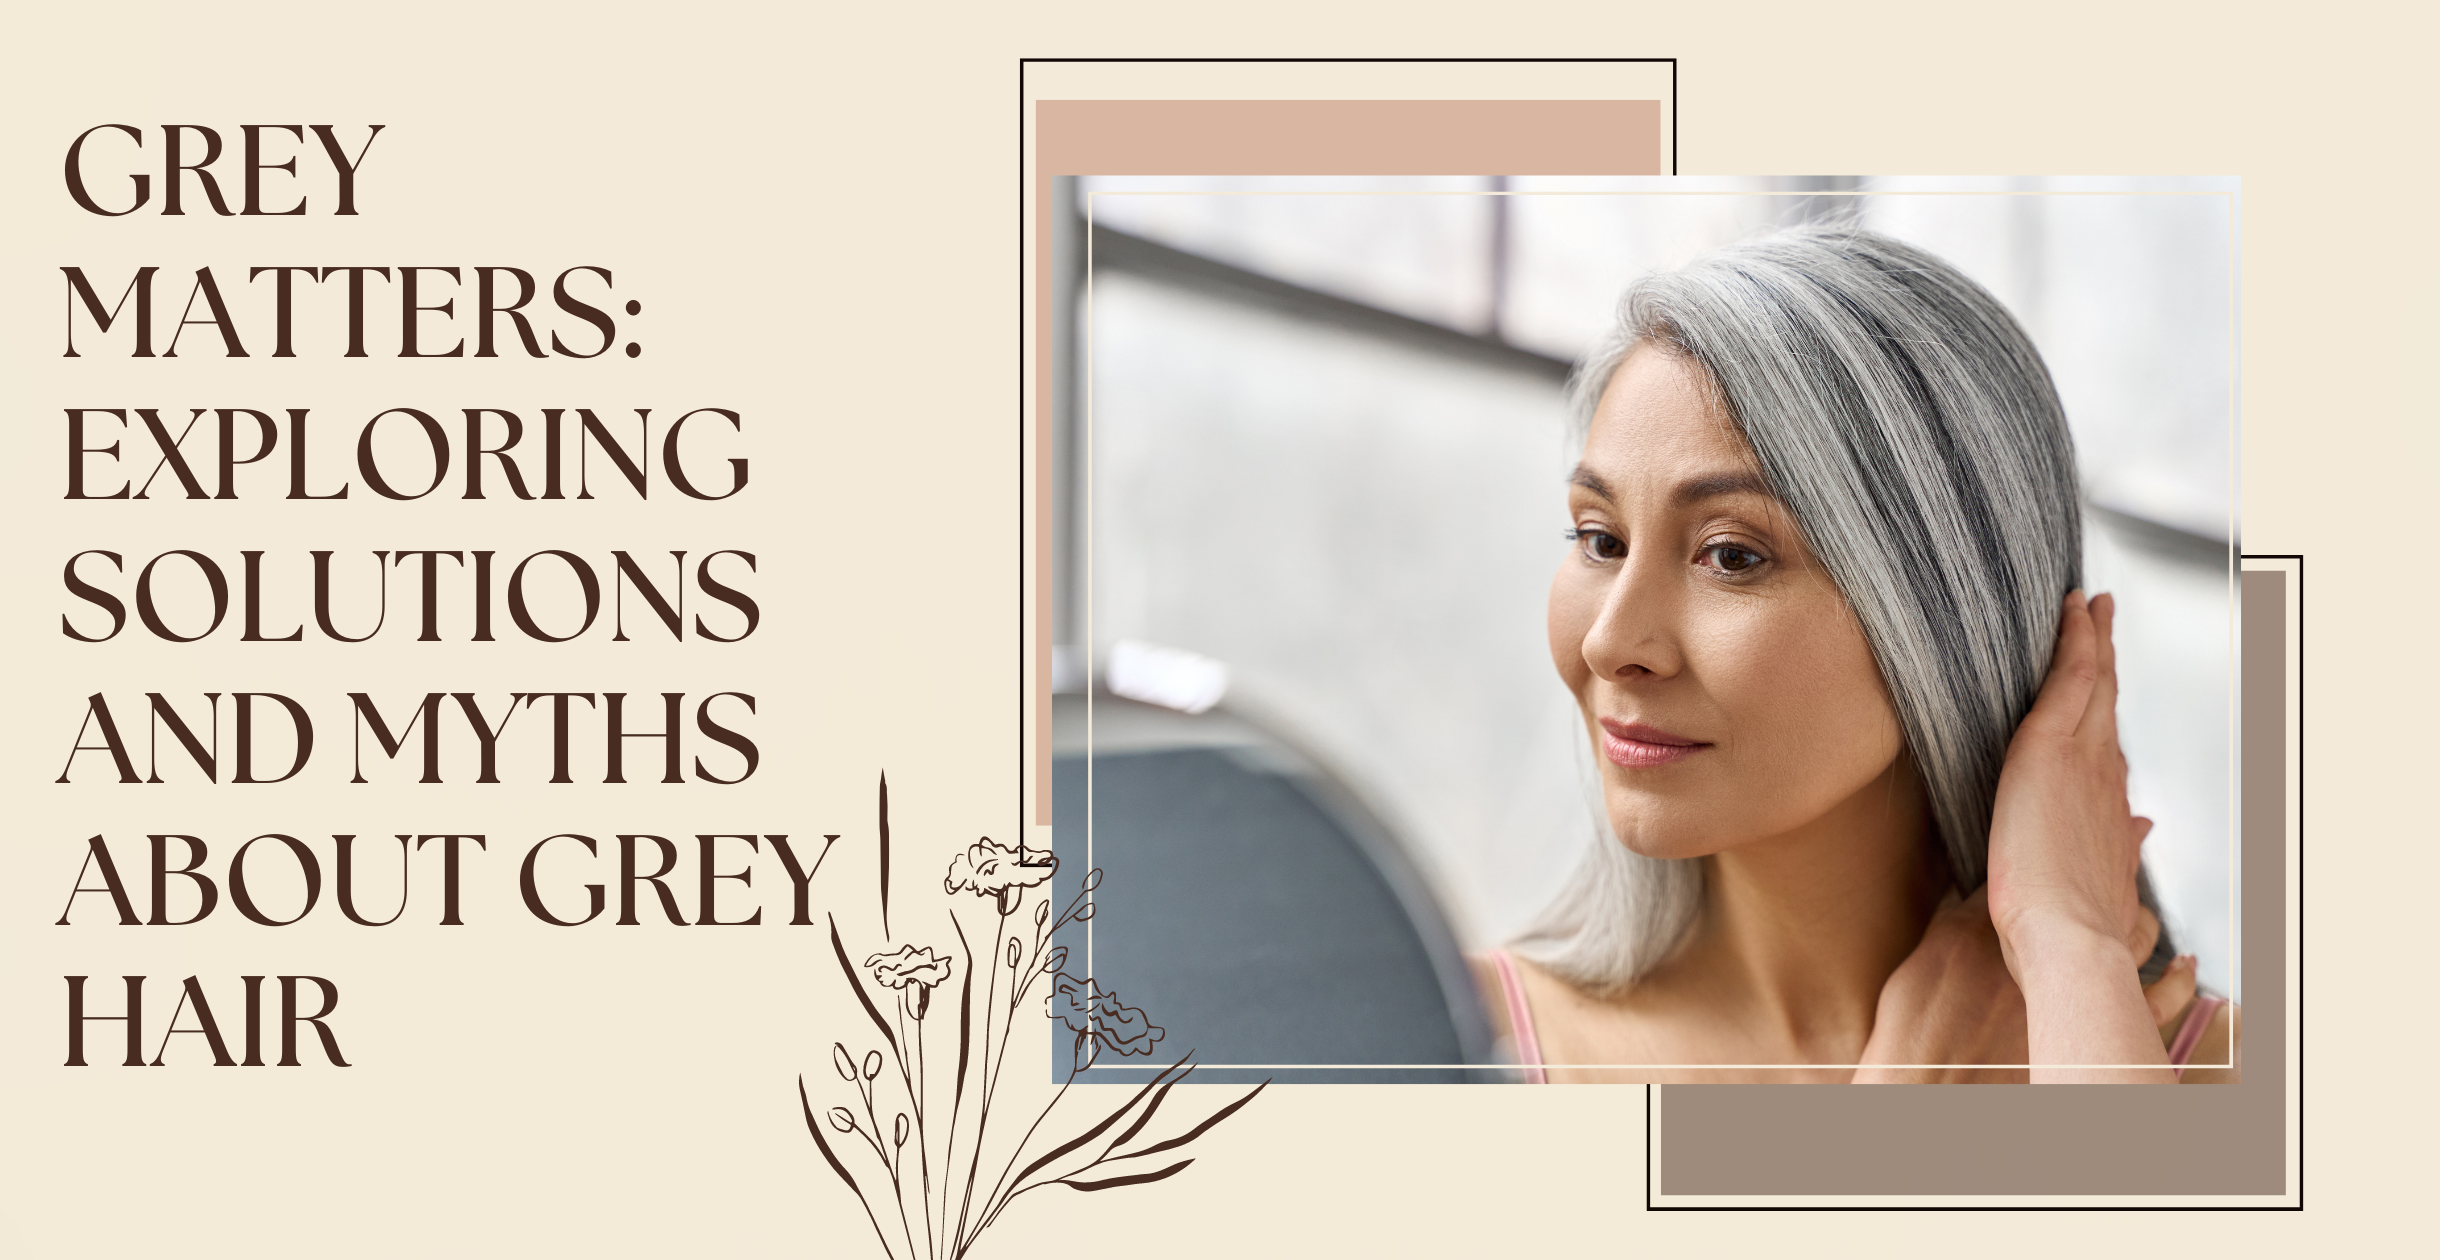 Gray Matters: Exploring Solutions and Myths About Gray Hair